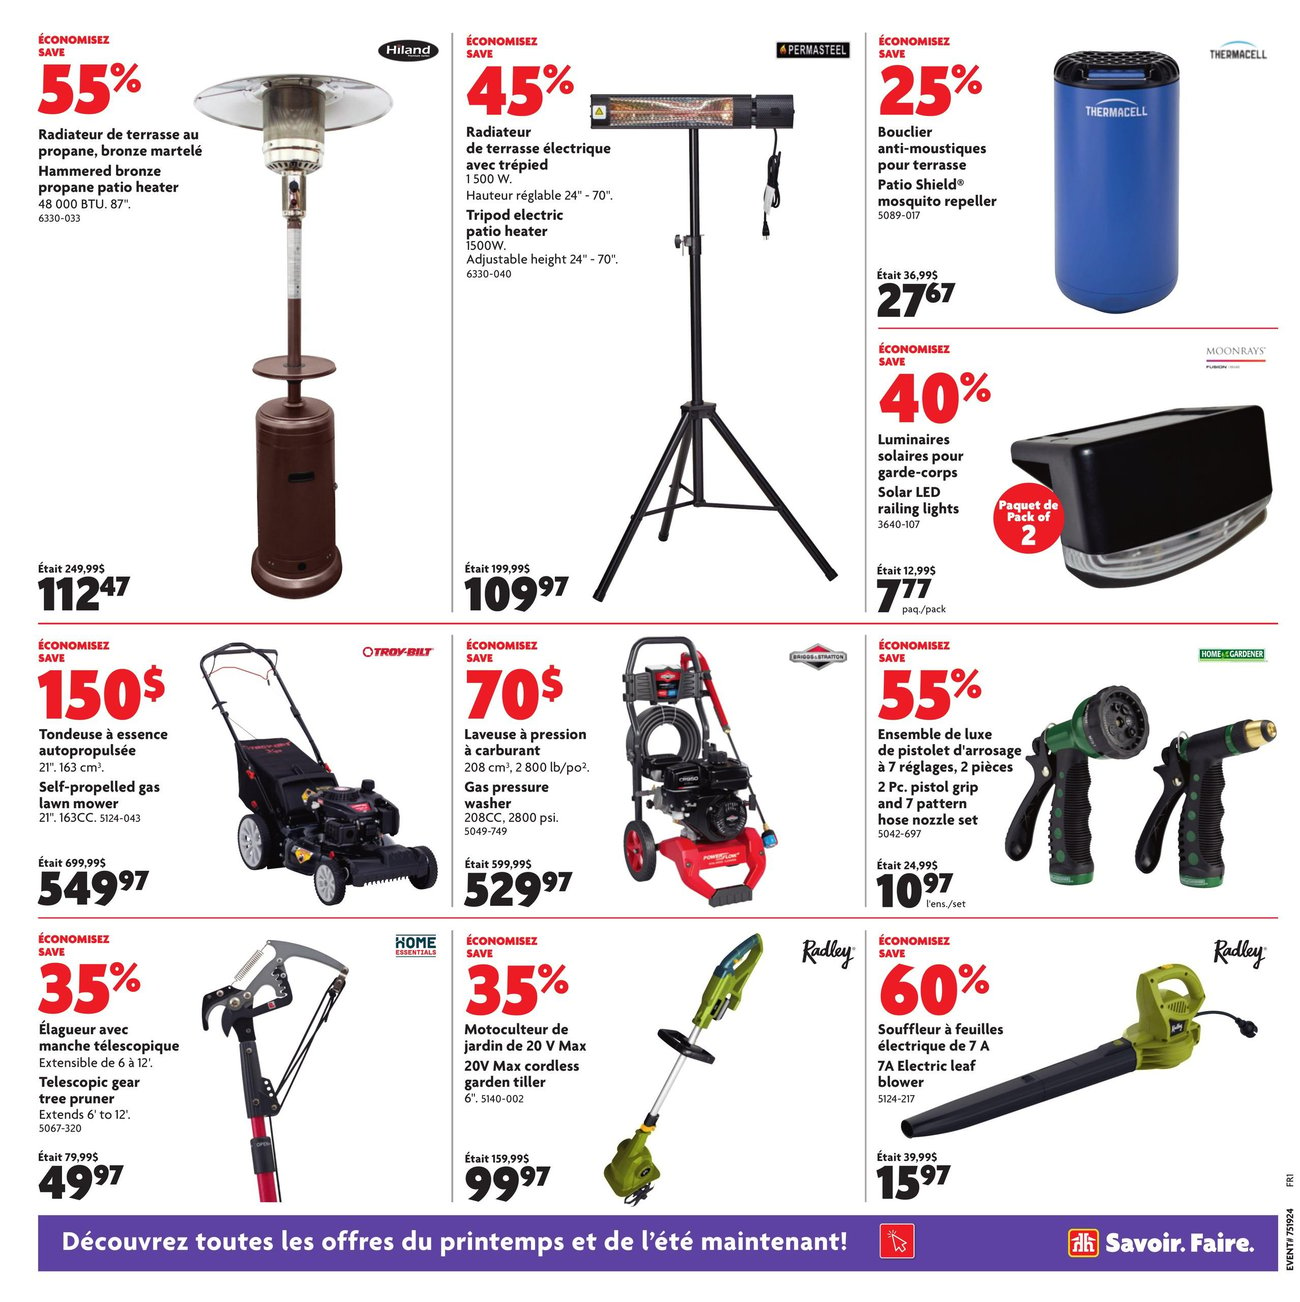 Home Hardware - Quebec - 2 Weeks of Savings - Page 15